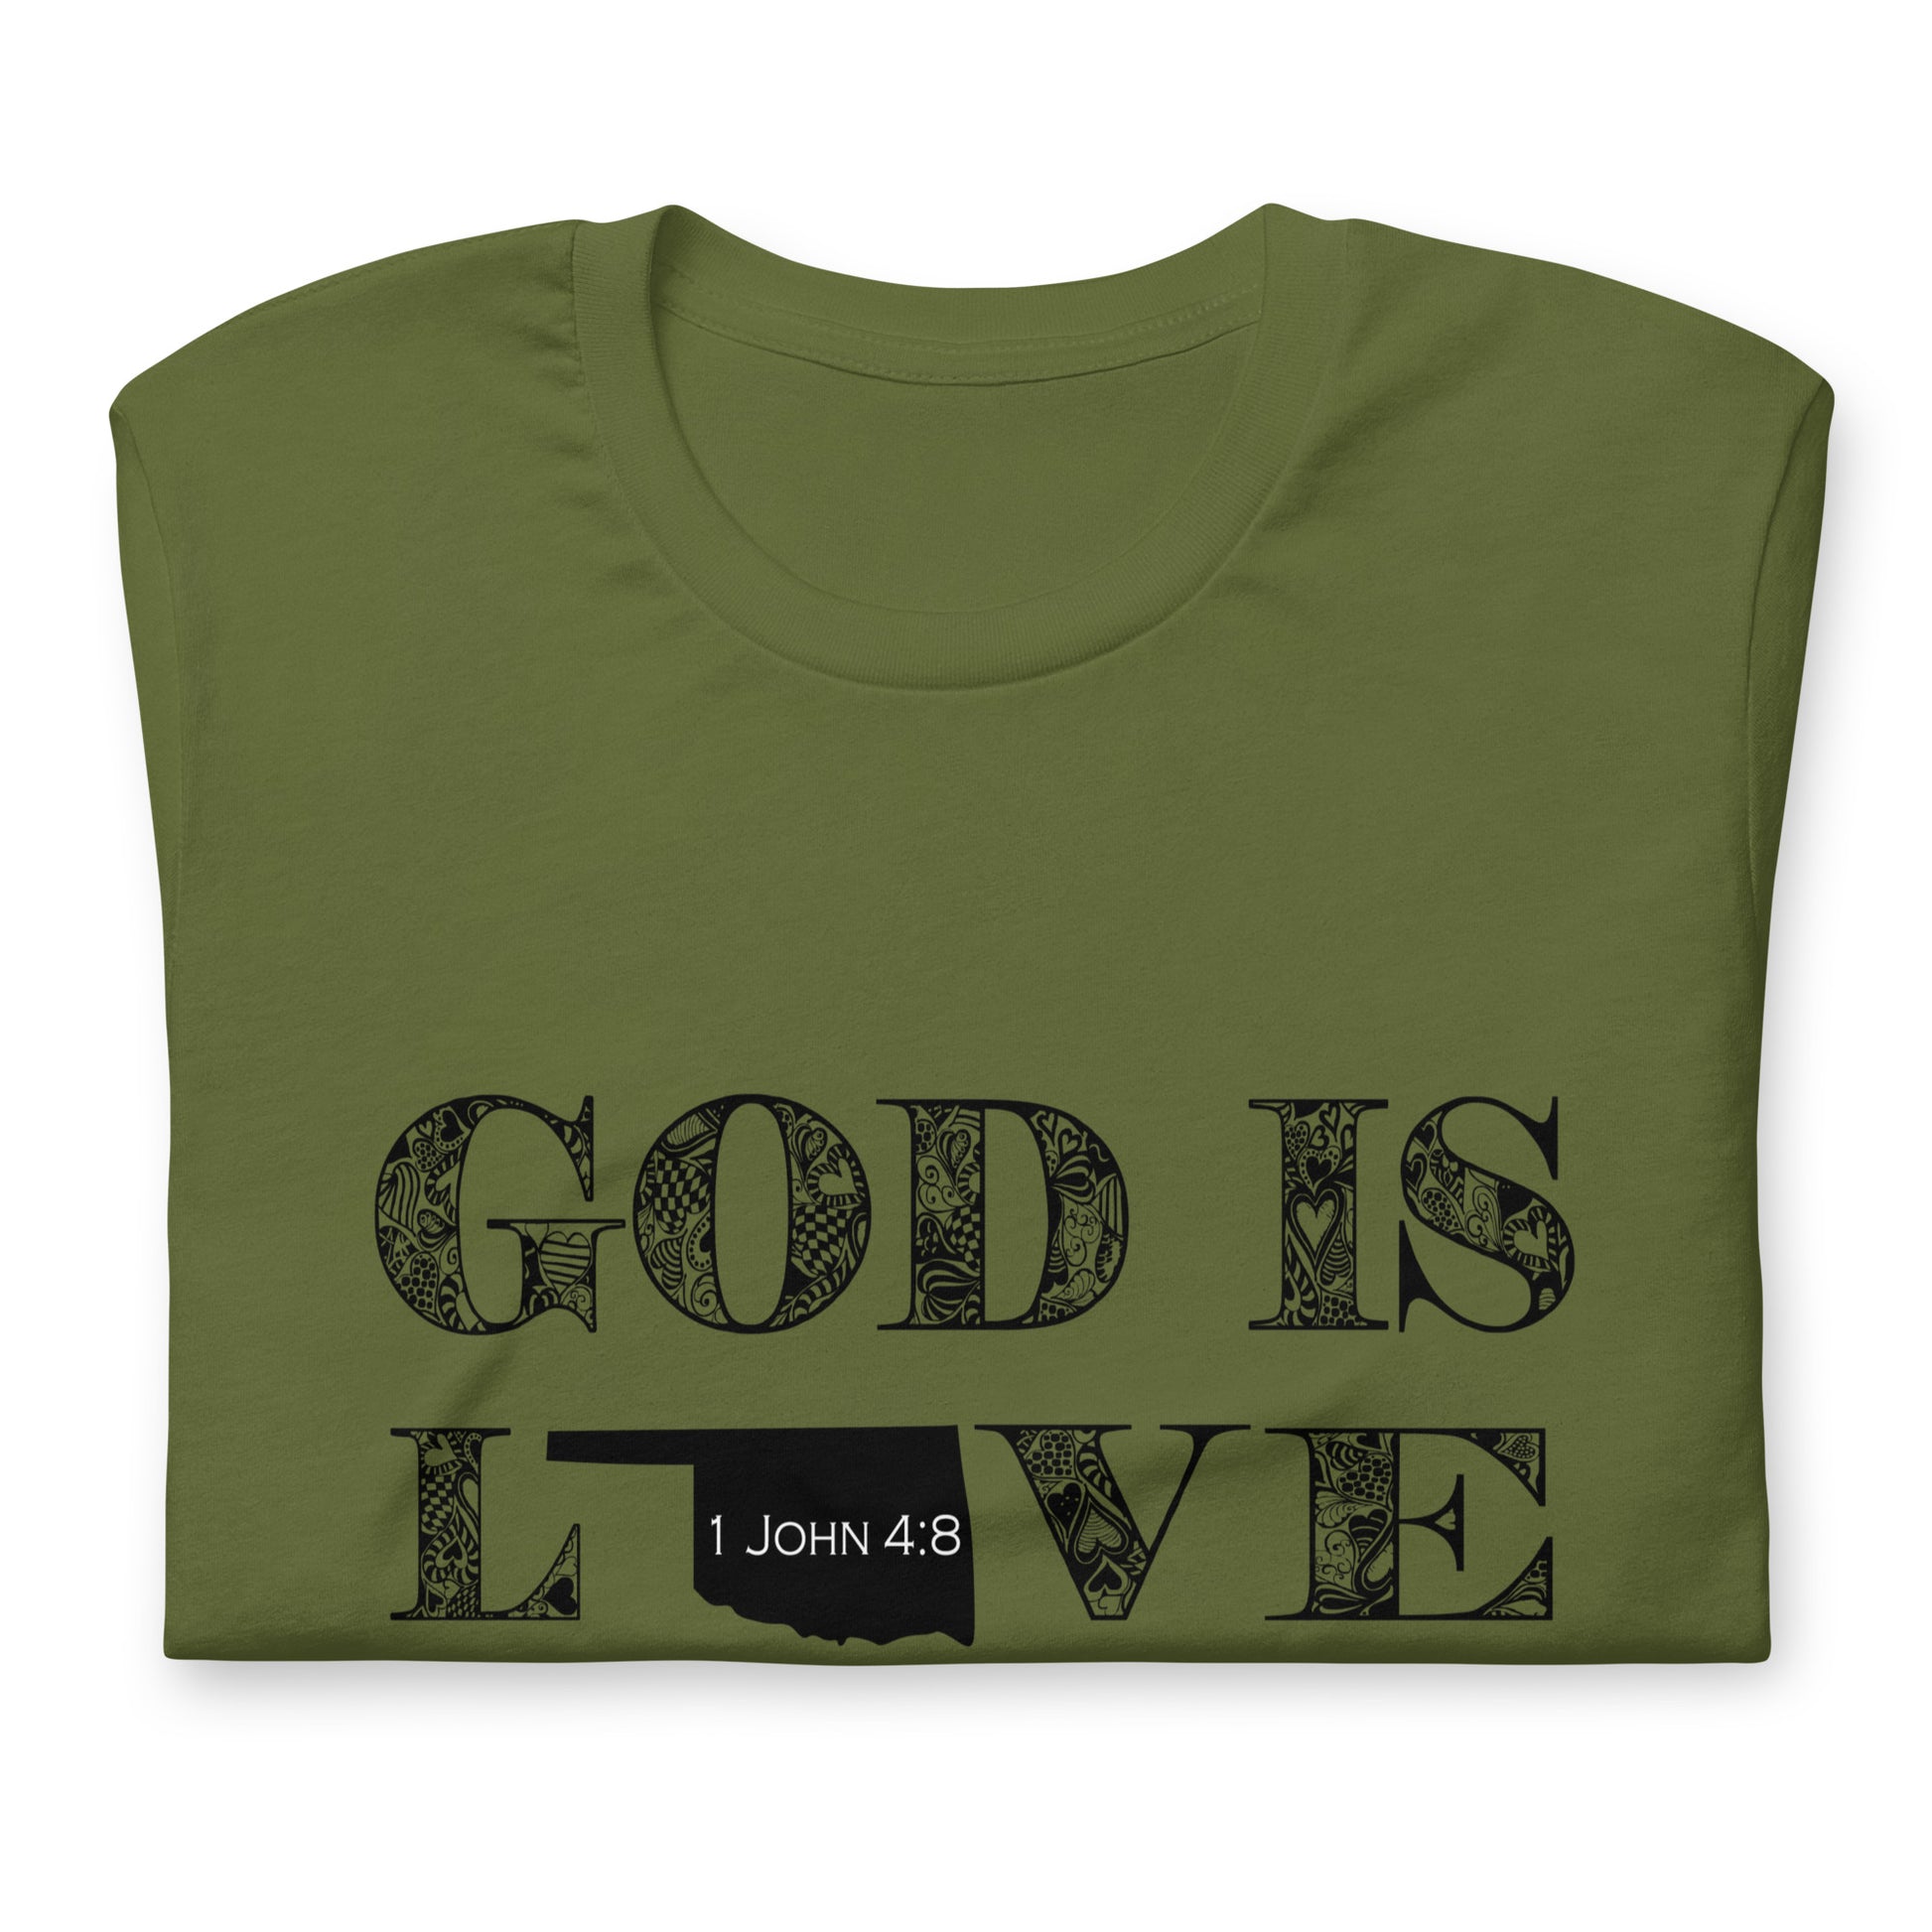 1 John 4:8 God is Love Unisex Oklahoma T-shirt in Olive - front view folded